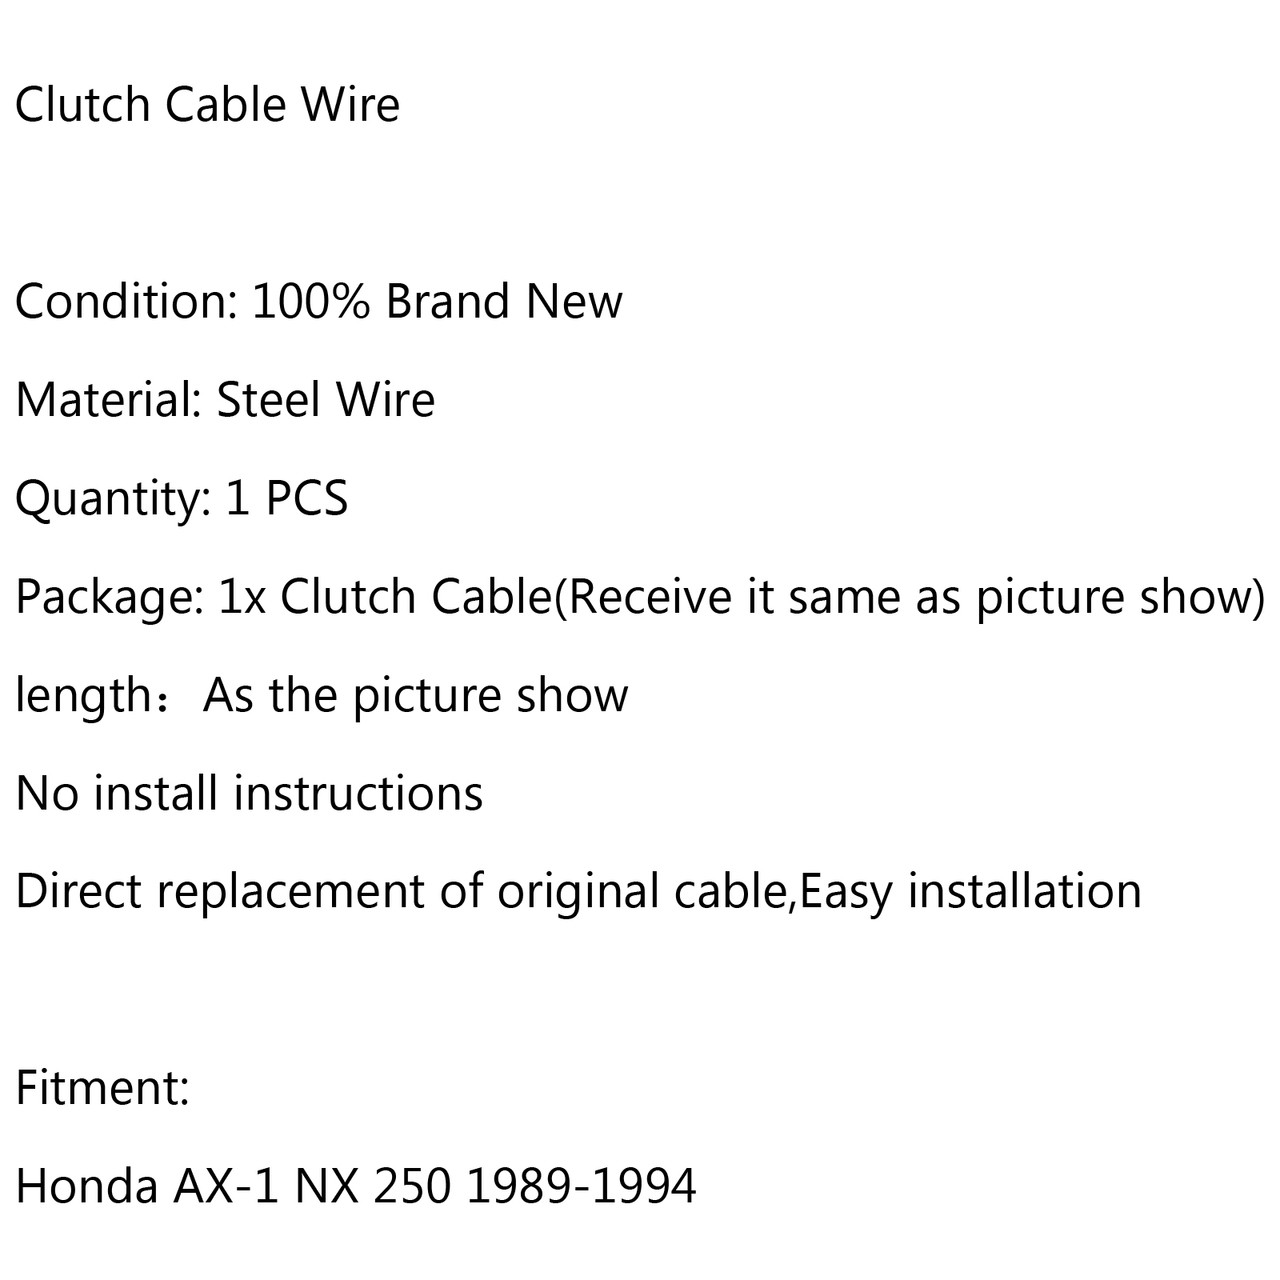 Clutch Cable Wire Steel Braided Honda AX-1 NX 250 (1989-1994)